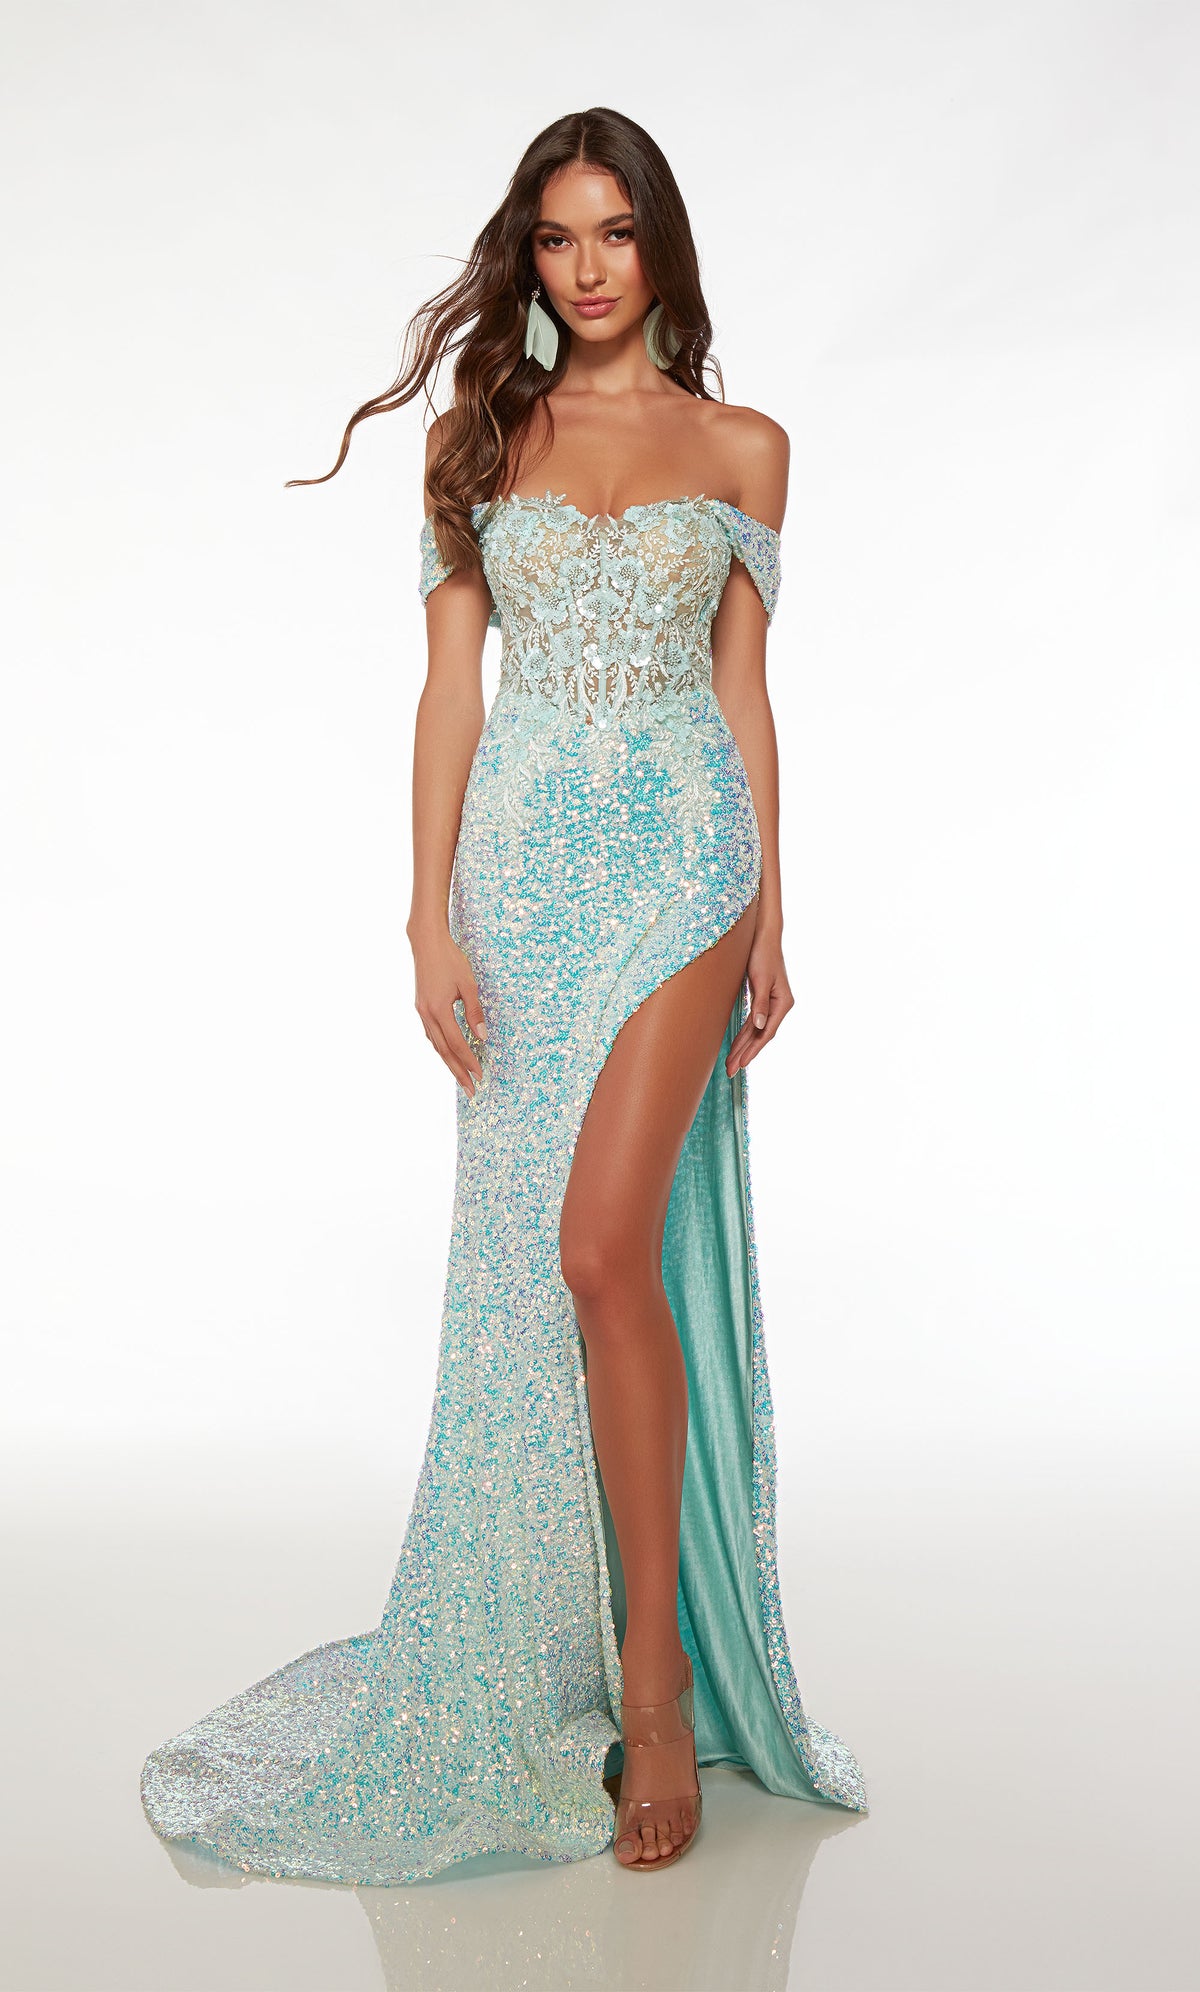 Mint green-opal sequin off-the-shoulder corset dress with an sheer lace top, high side slit, lace-up back, and an long train for an captivating and elegant look.